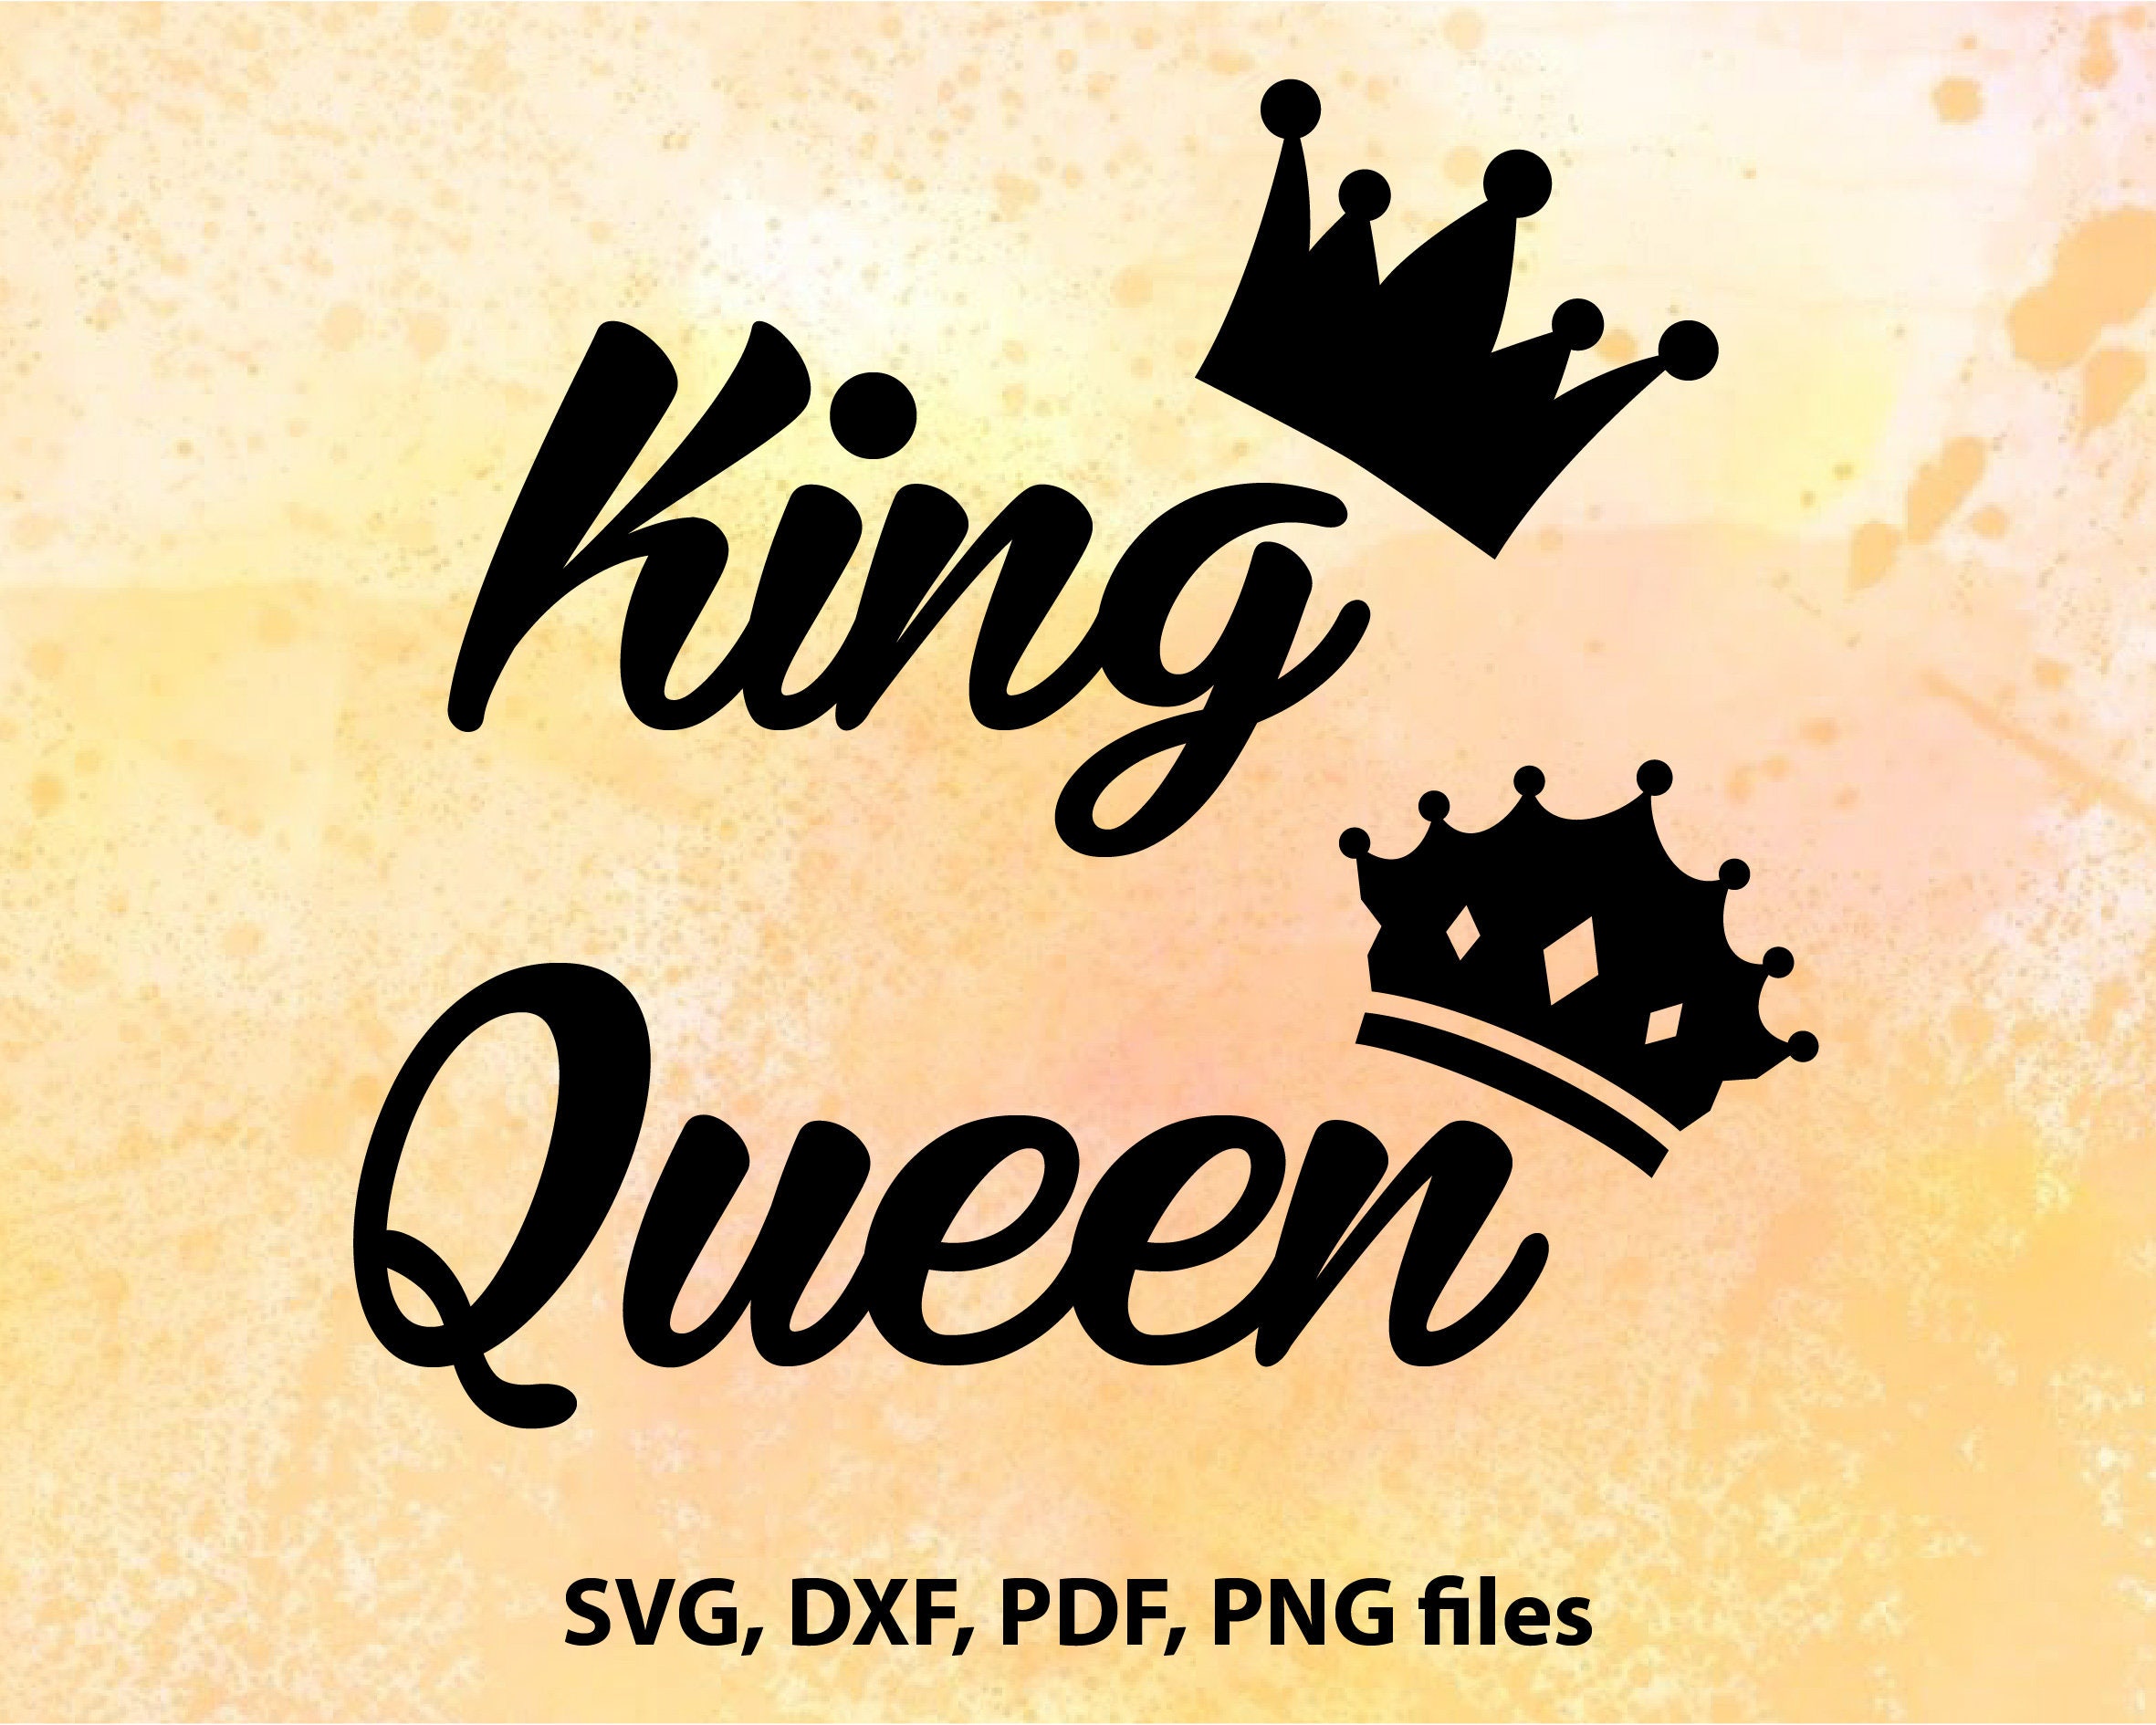 Download Queen king svg files Crown cutting file Silhouette Cricut